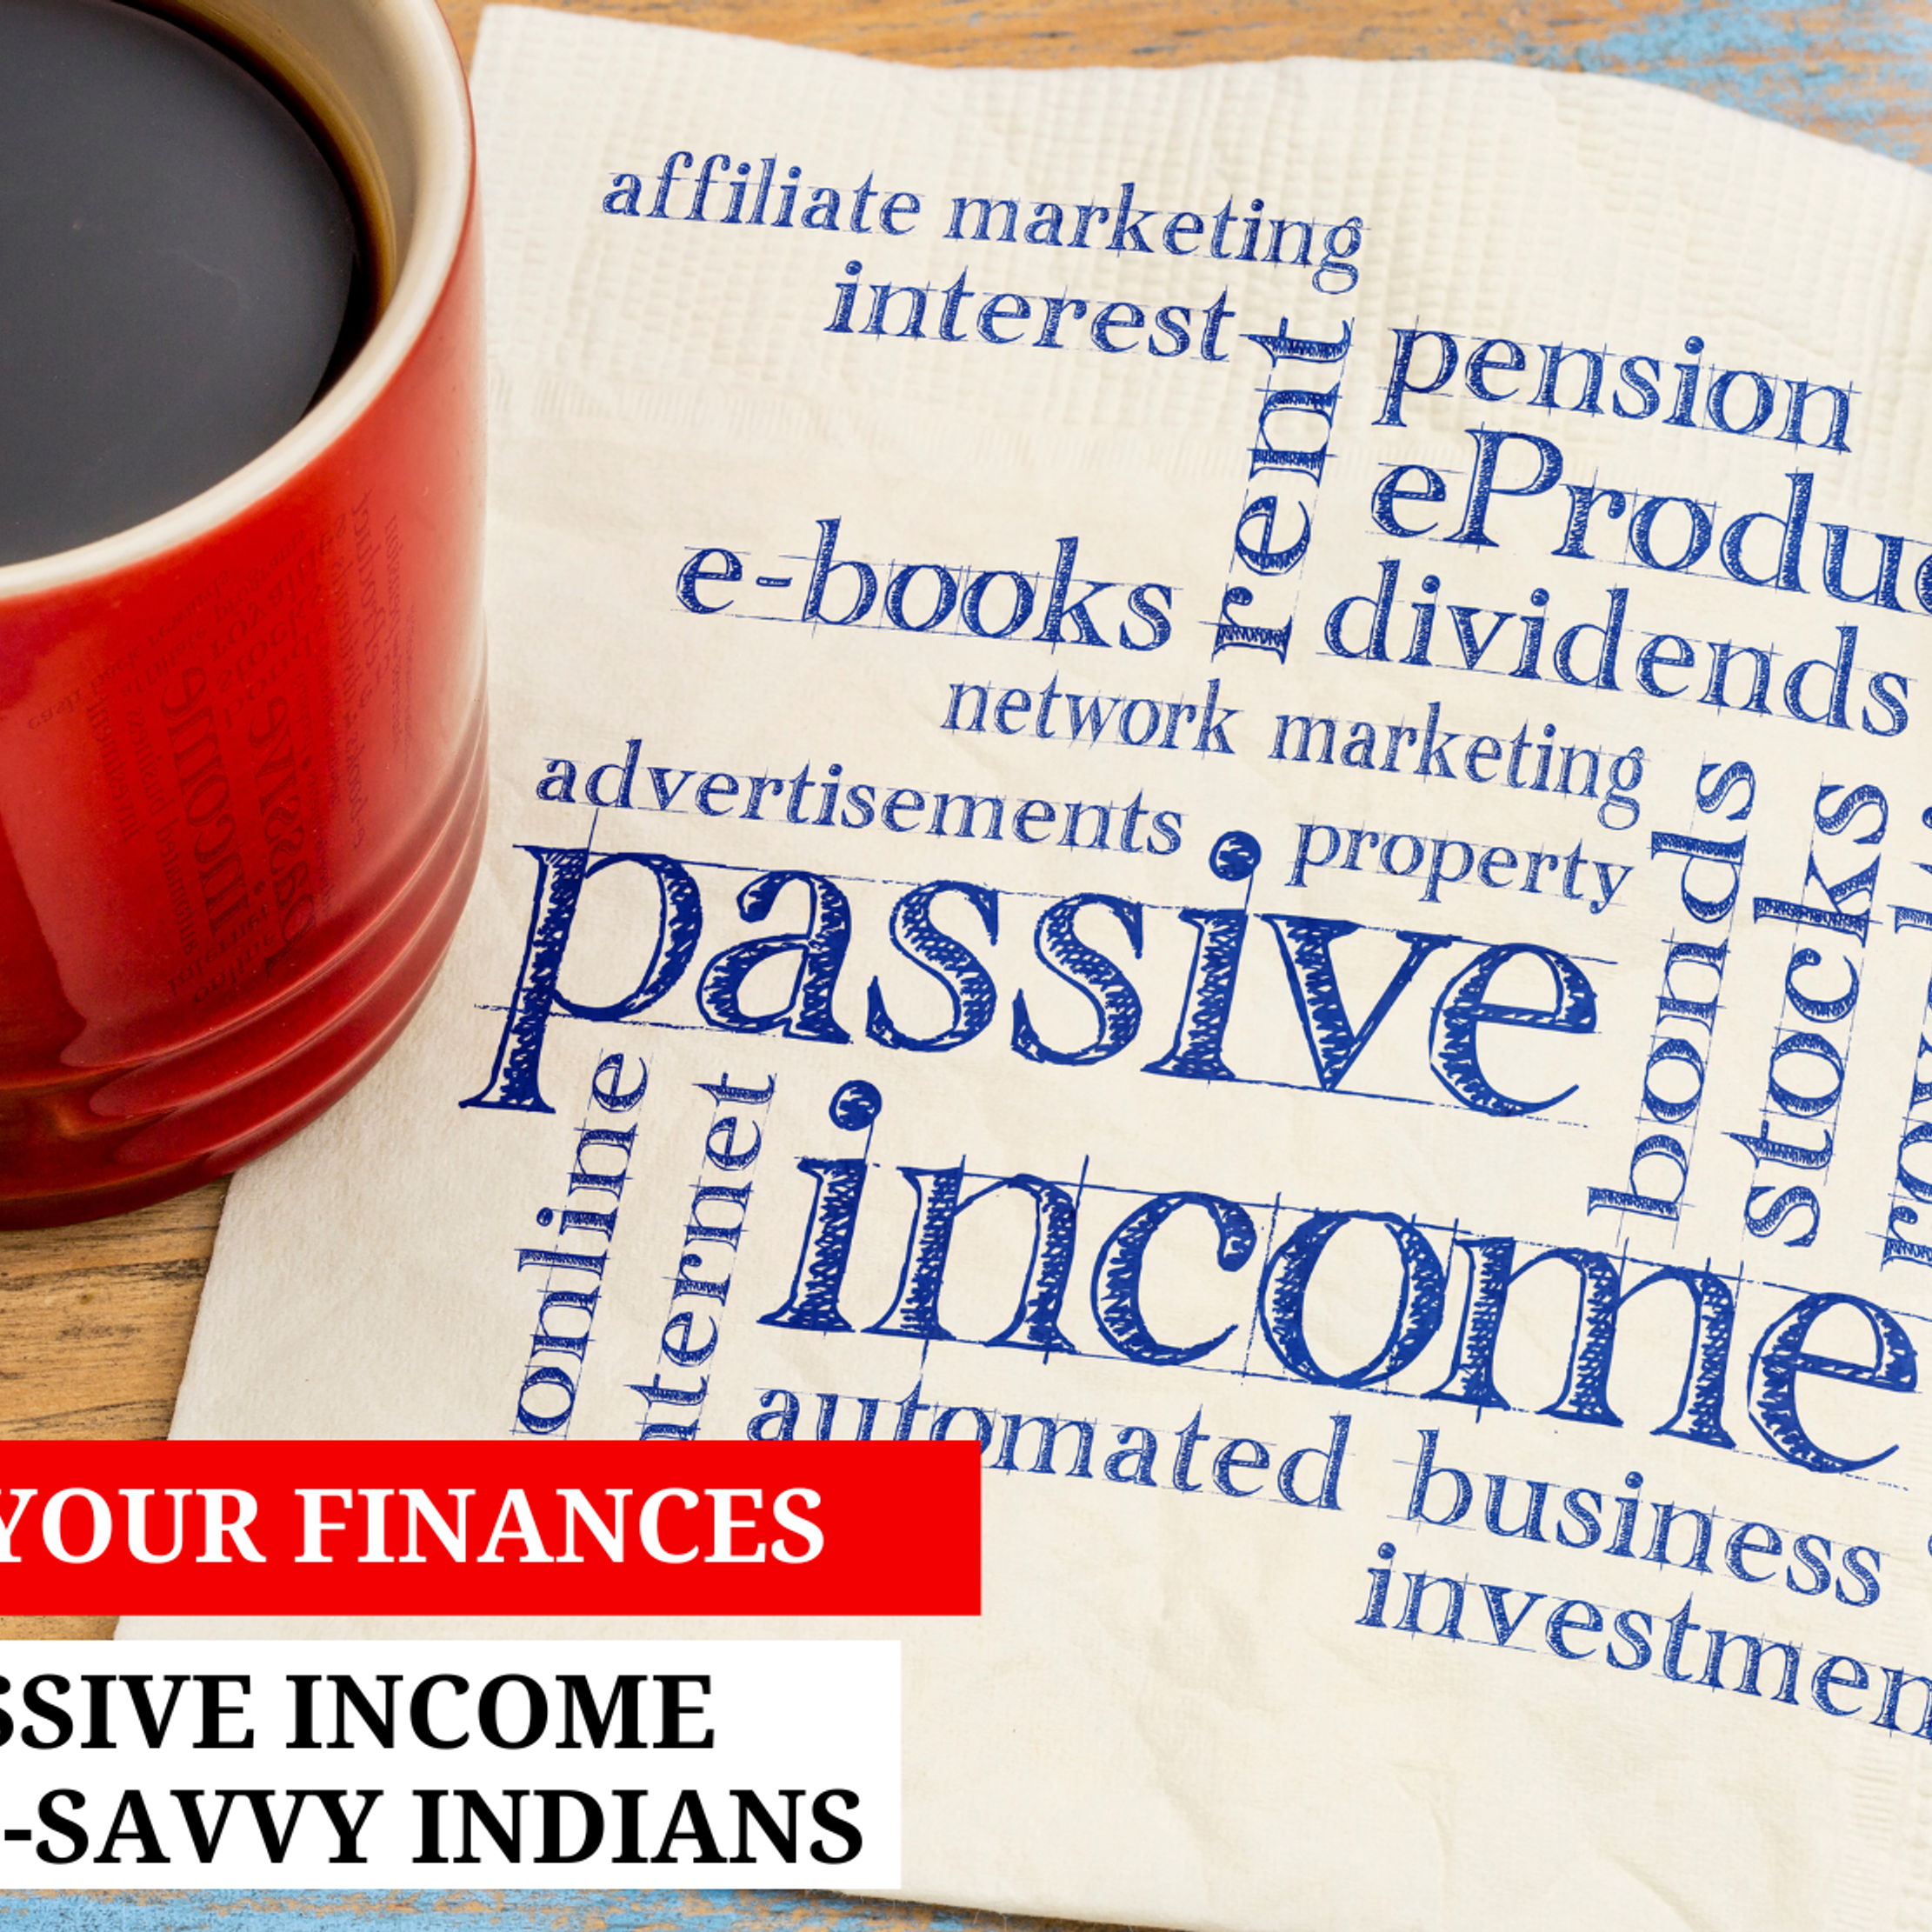 Future-Proof Your Finances: 6 Emerging Passive Income Ideas for Tech-Savvy Indians